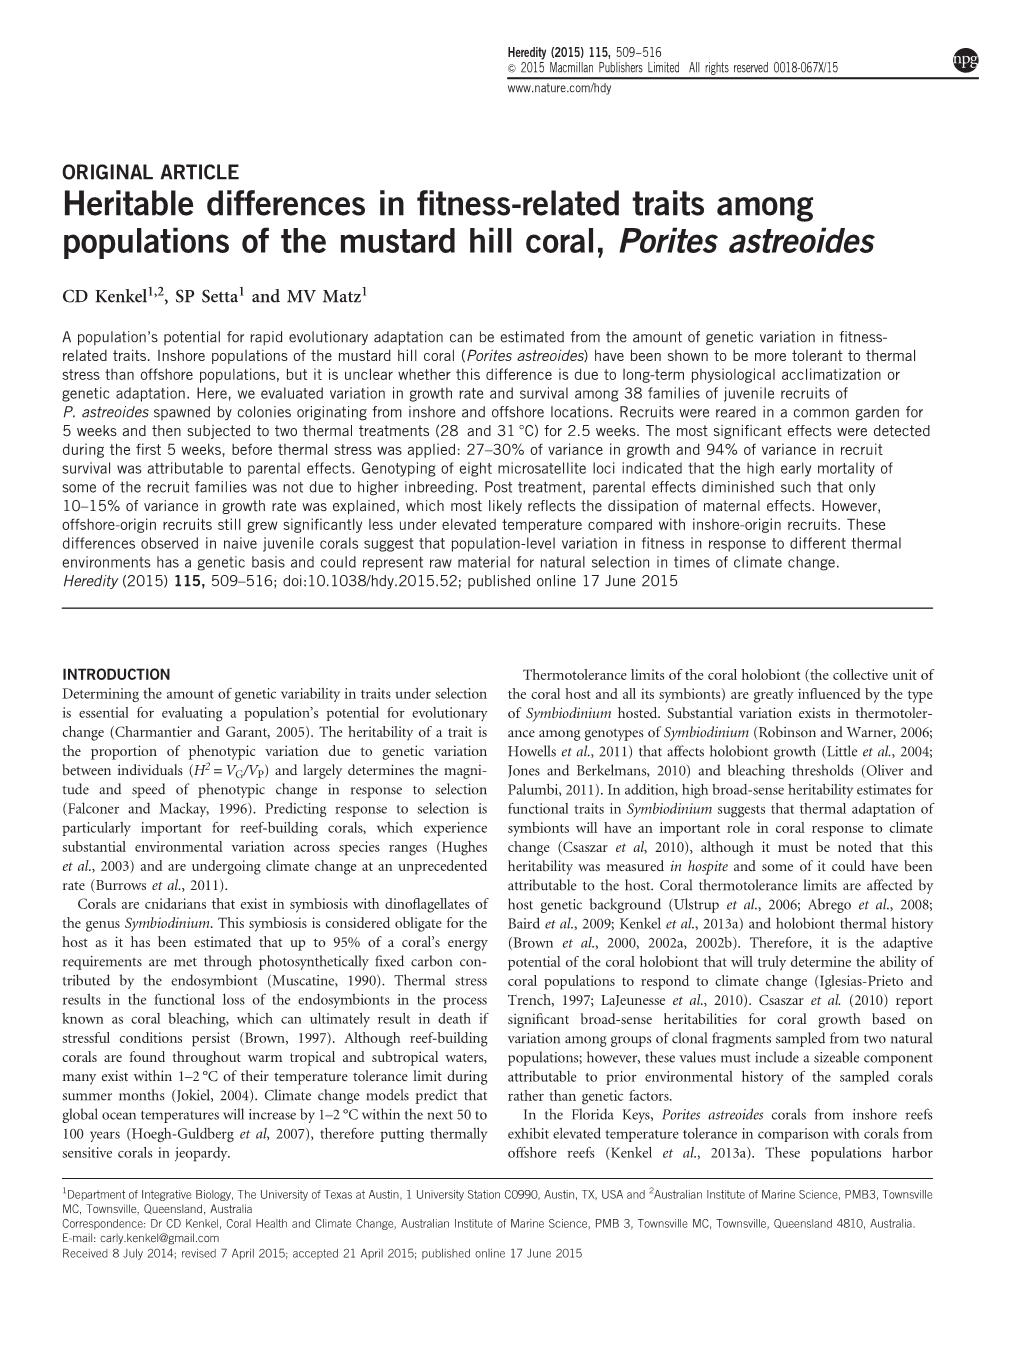 Heritable Differences in Fitness-Related Traits Among Populations of The